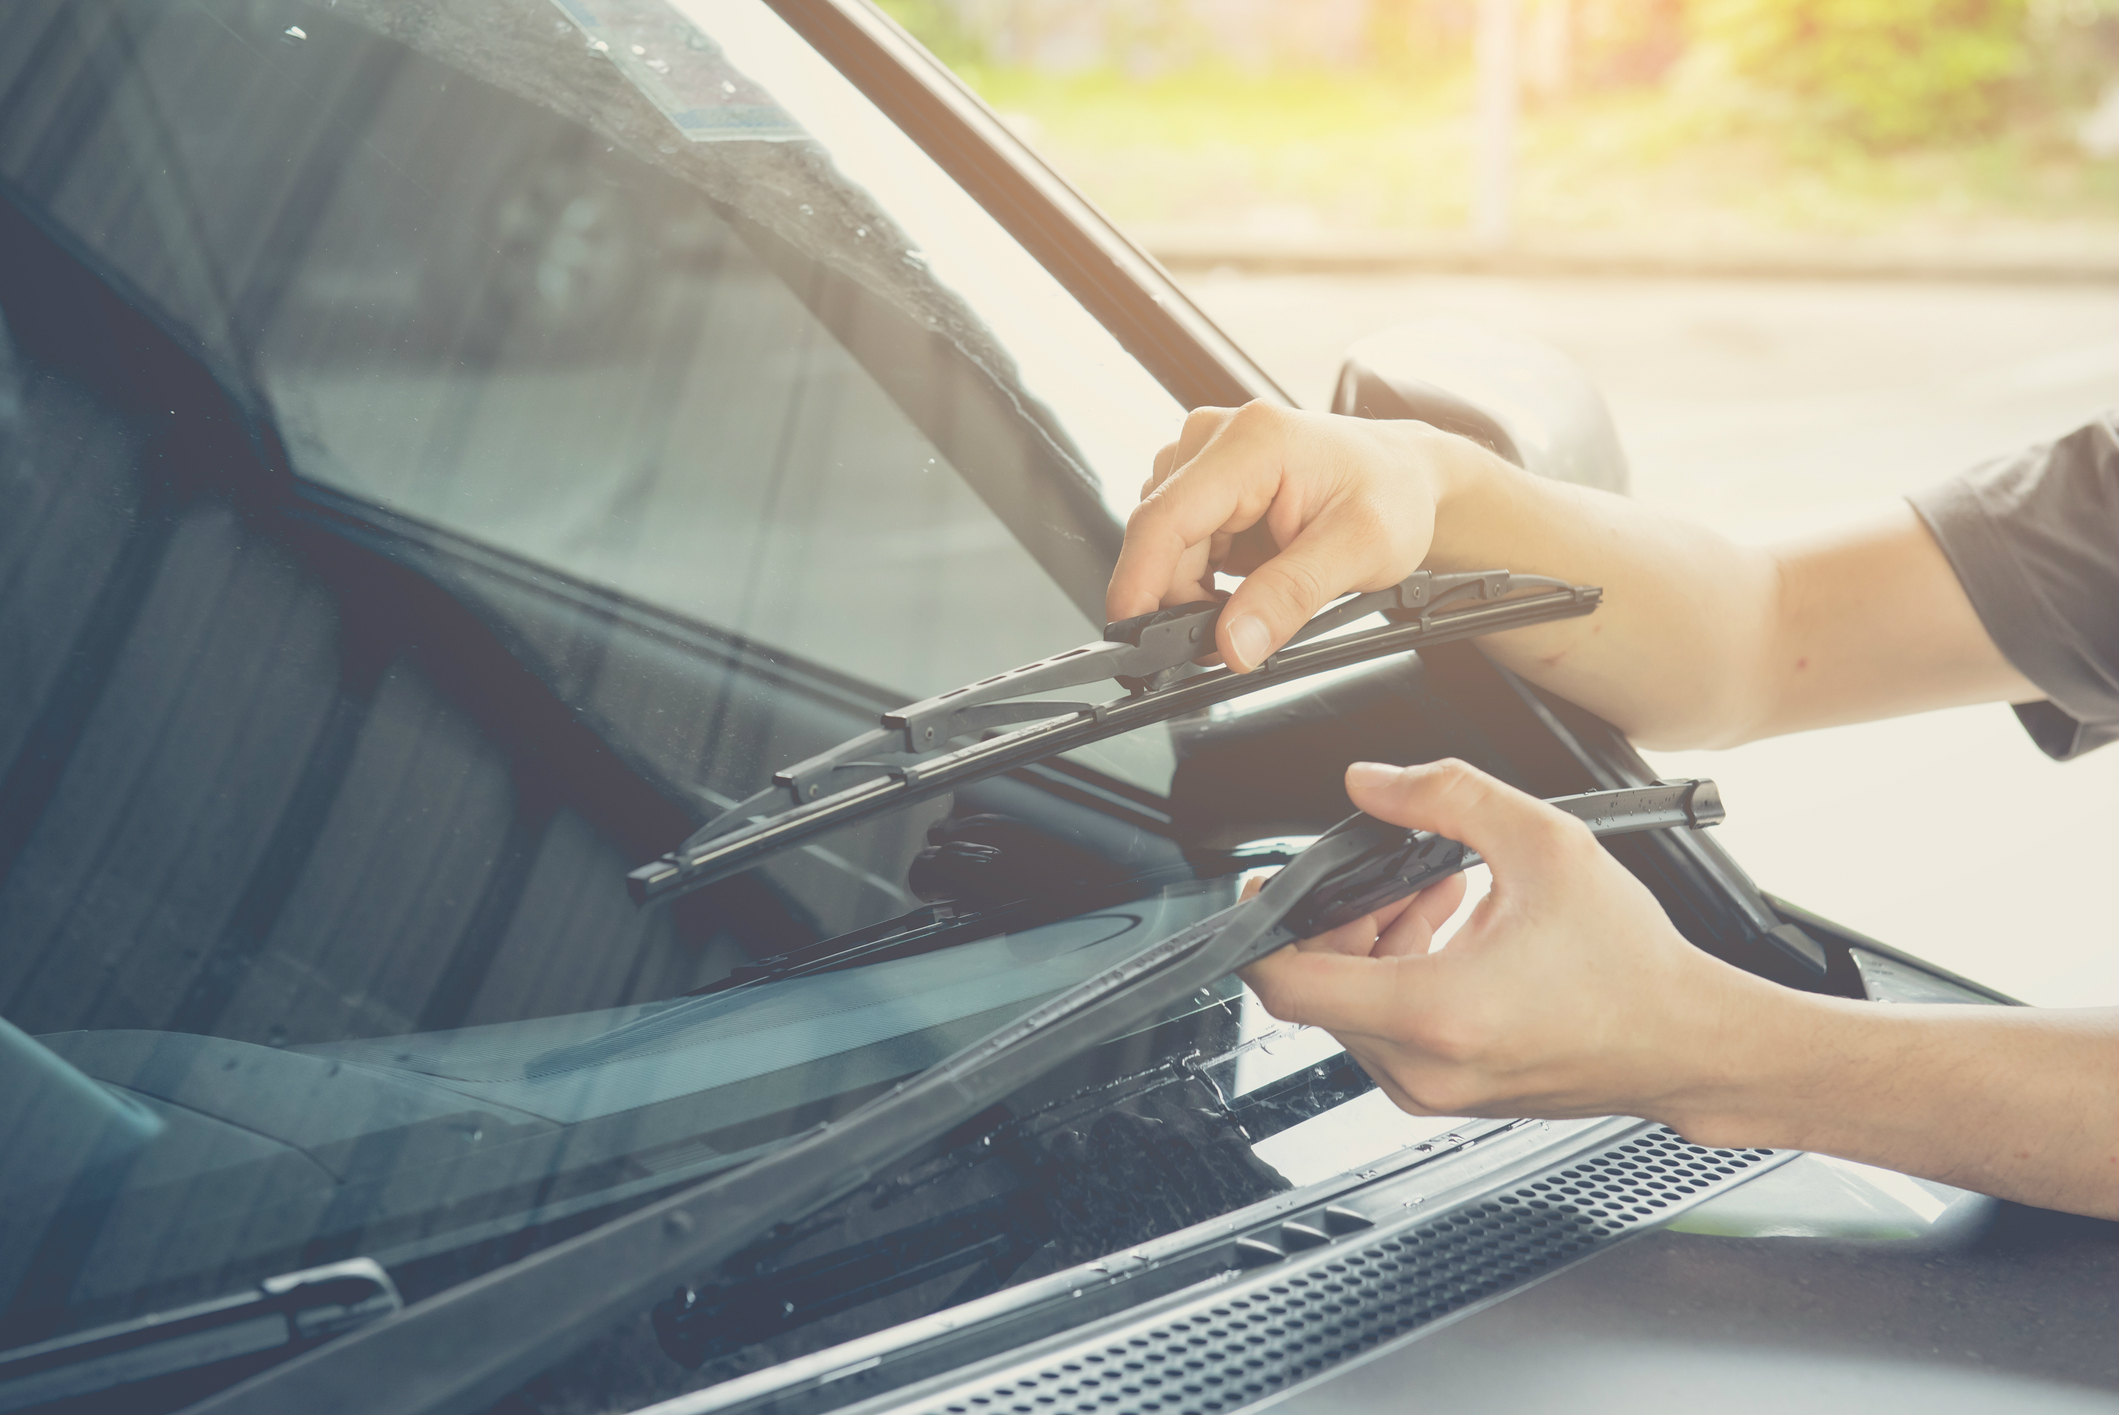 How do you know if windscreen wipers need replacing?